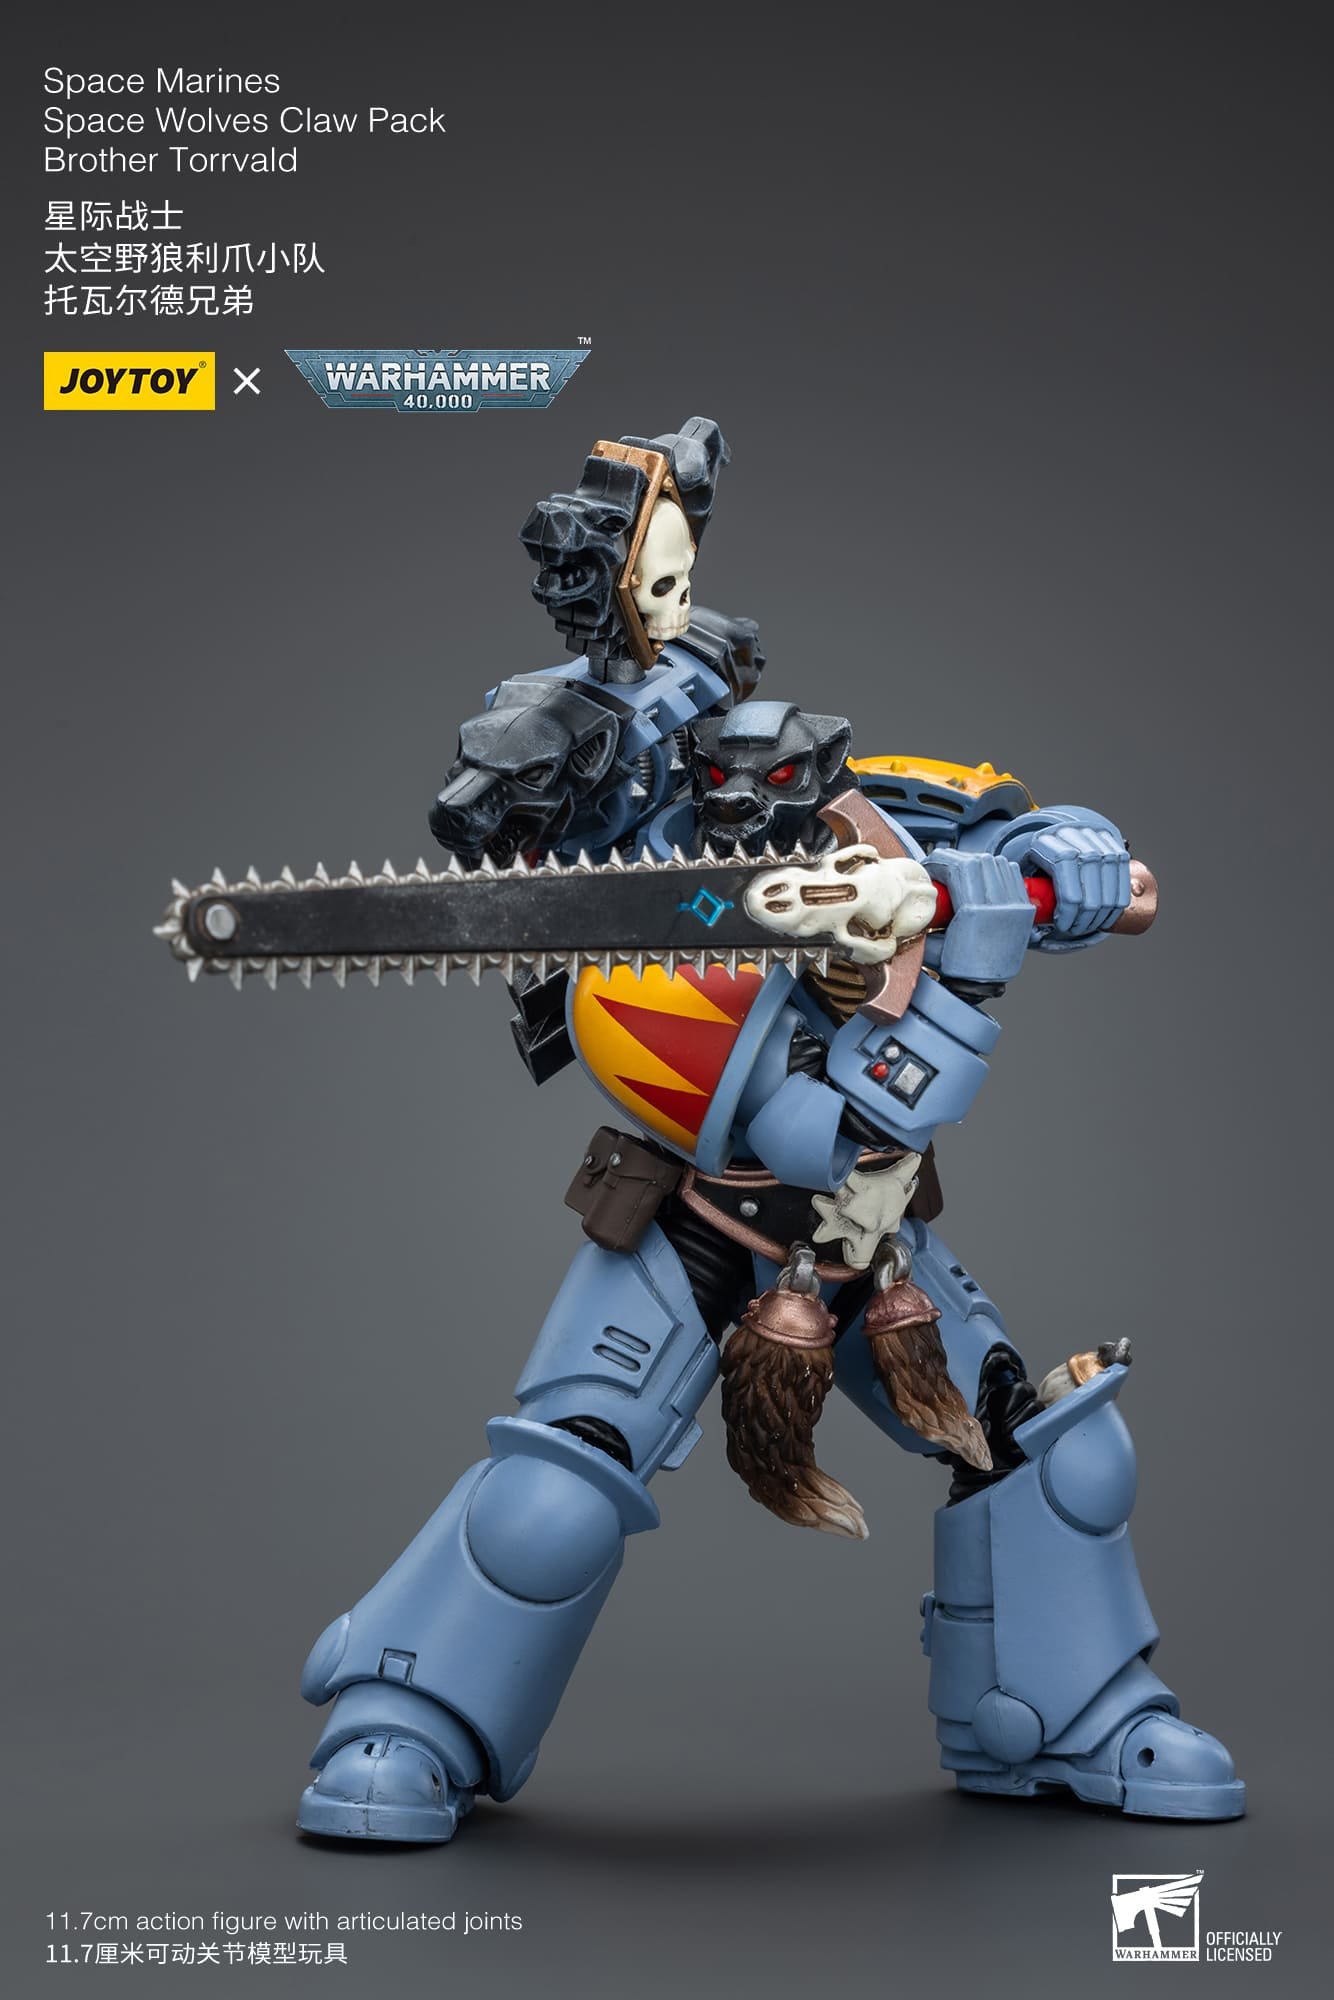 Space Wolves Claw Pack Brother Torrvald 2 - Joytoy Figure